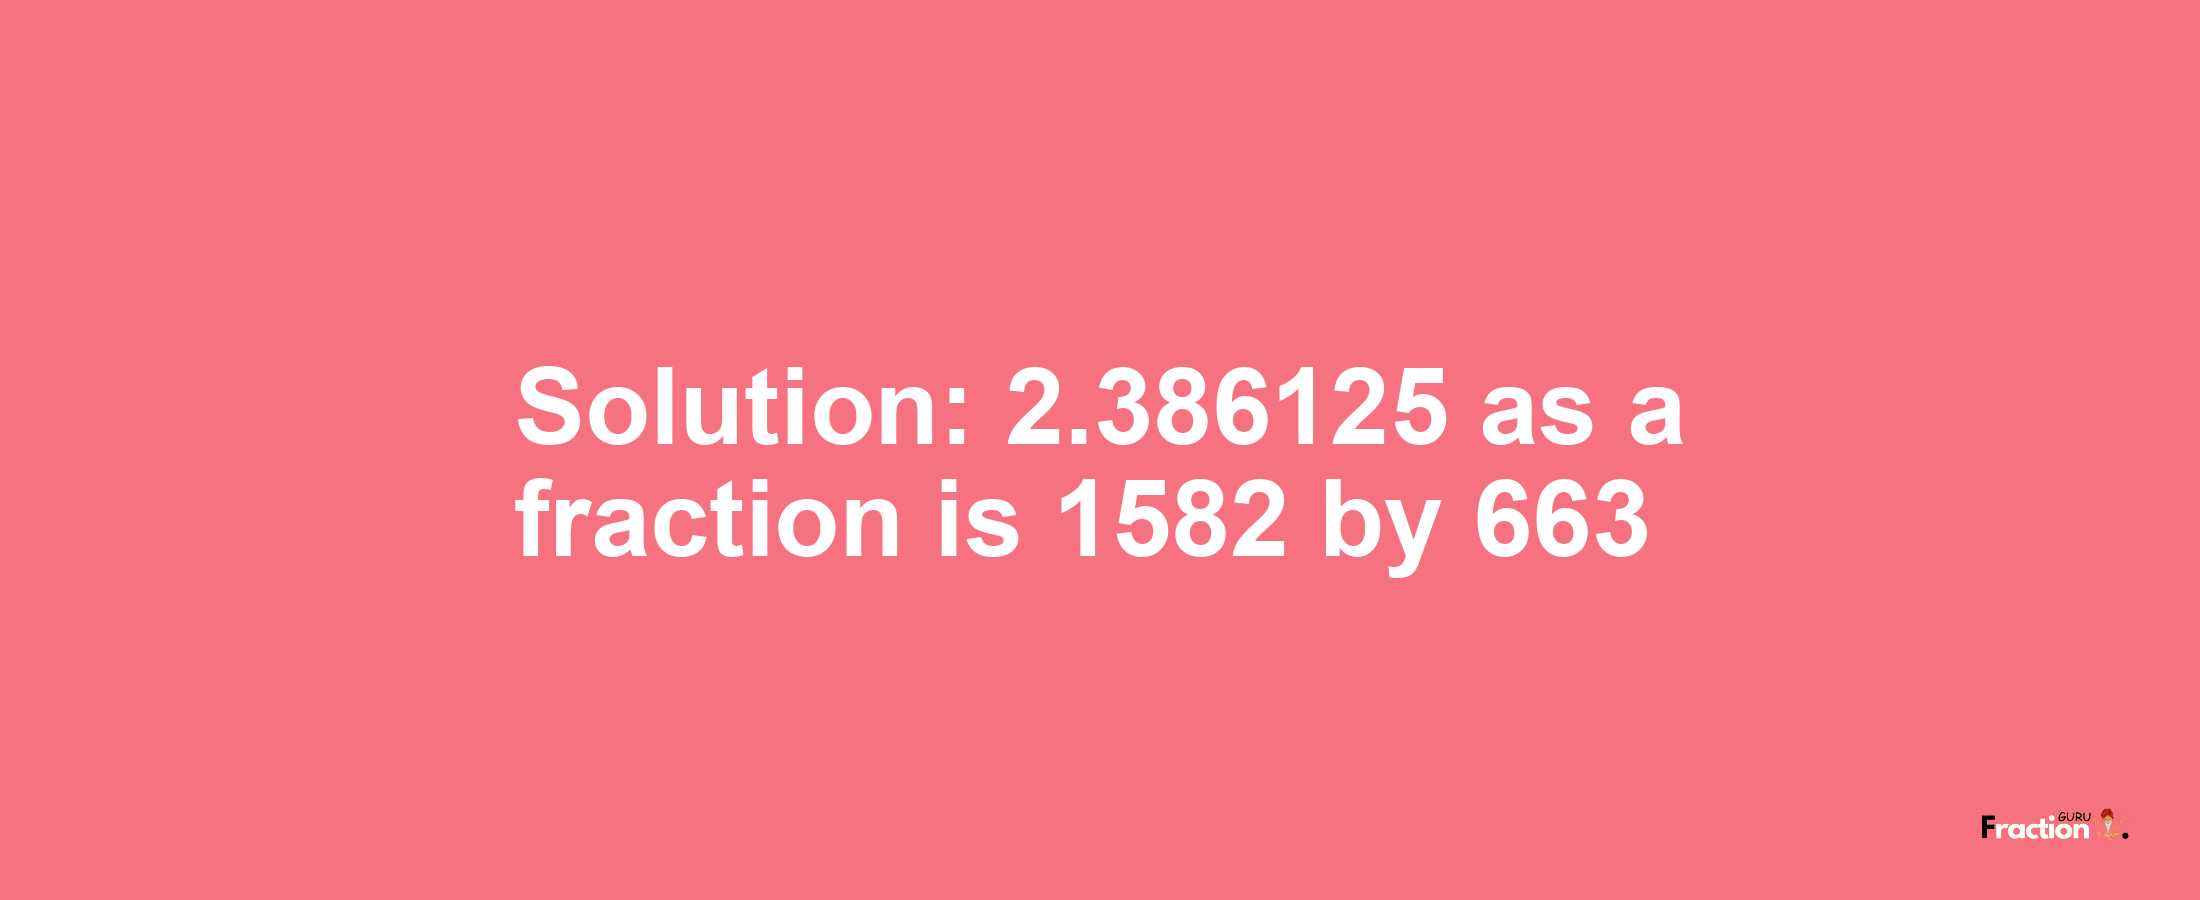 Solution:2.386125 as a fraction is 1582/663